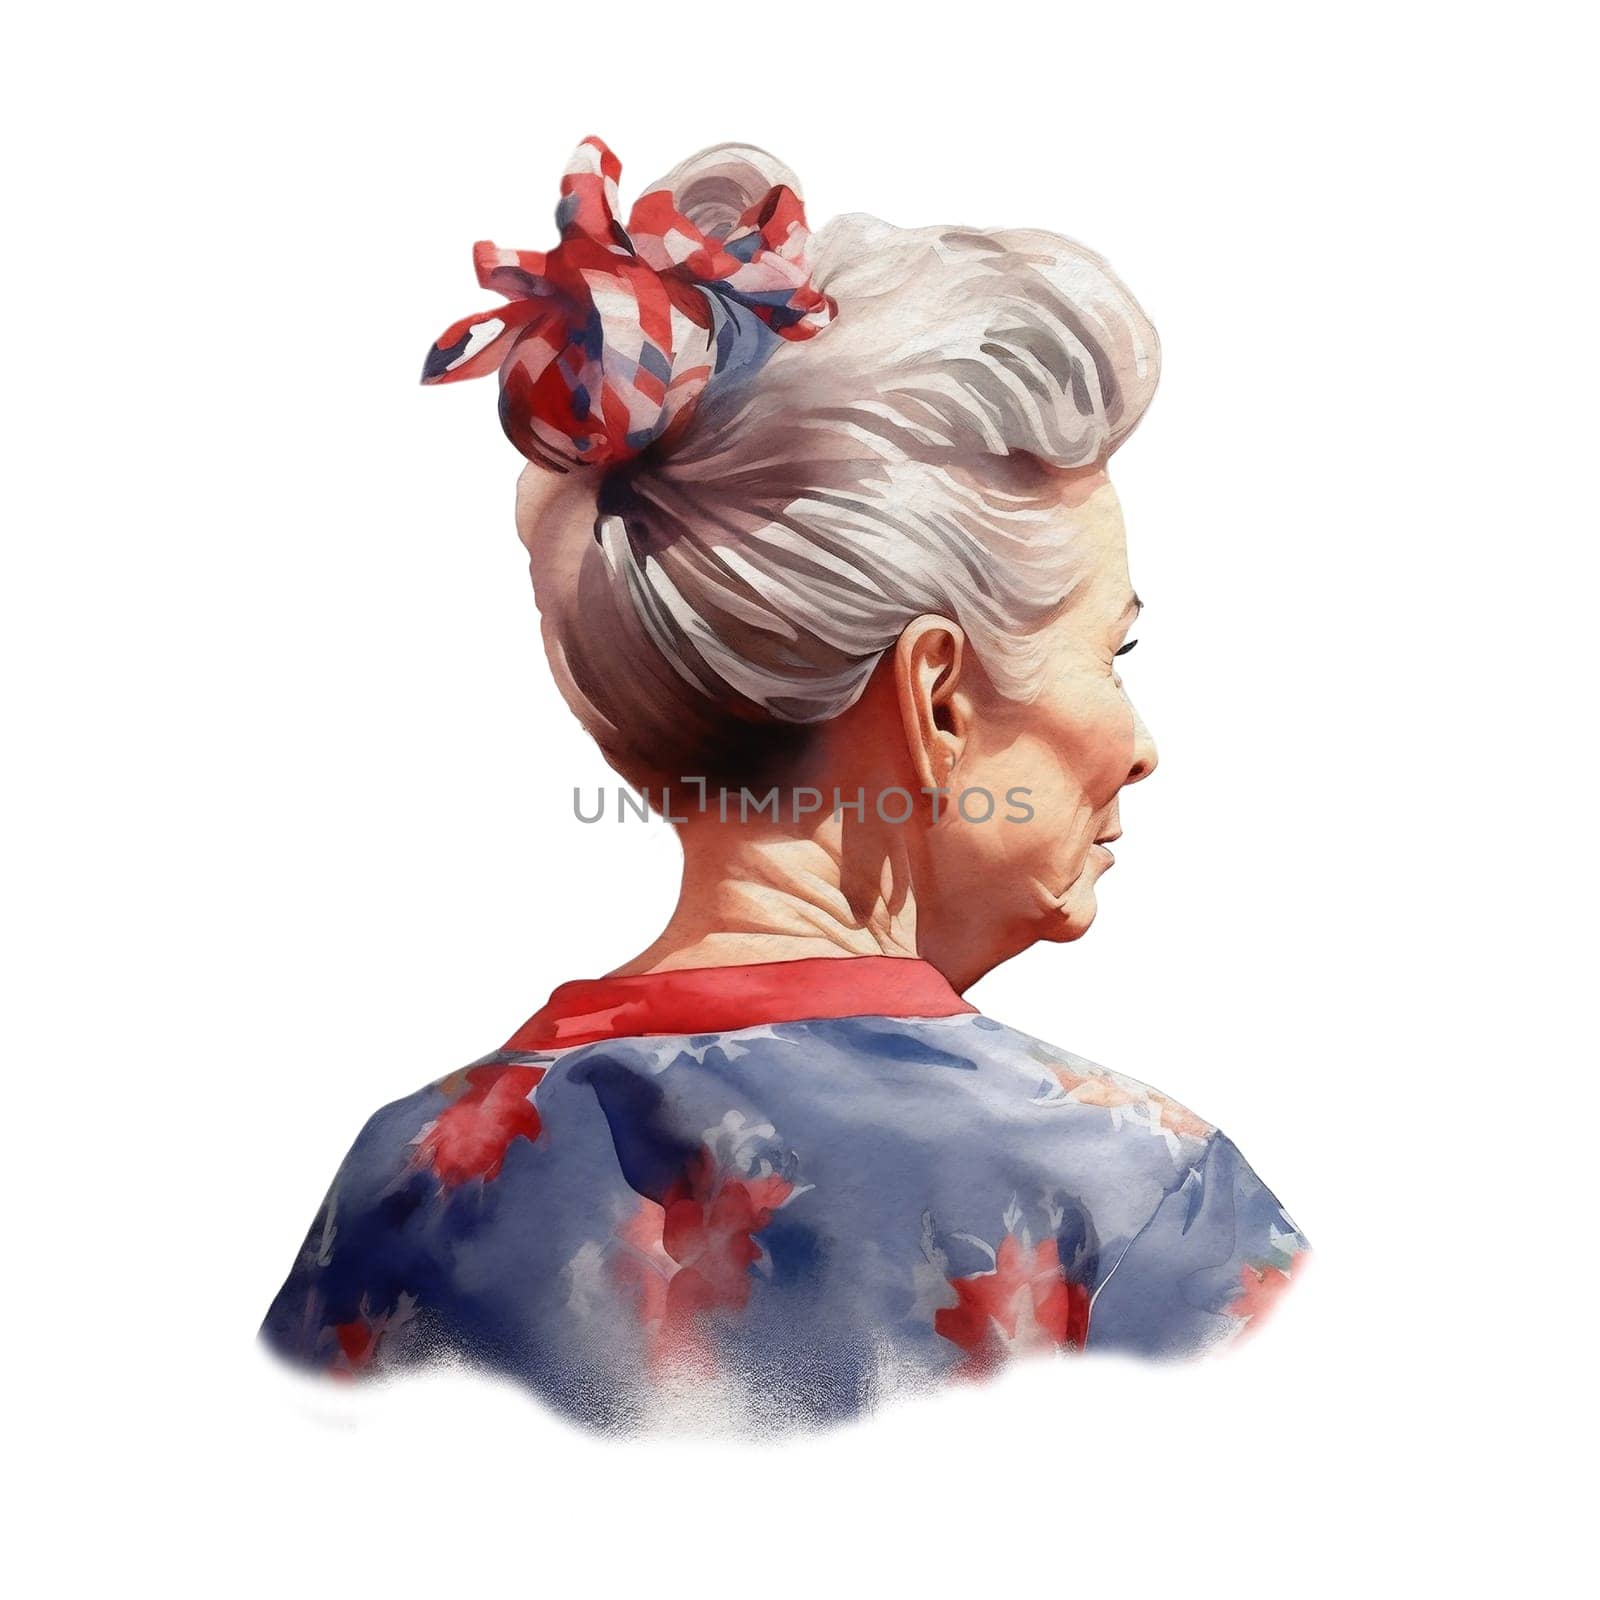 Watercolor American Old Lady Woman Messy Bun. American Woman with 4th of July accessories Illustration Clipart by Skyecreativestudio